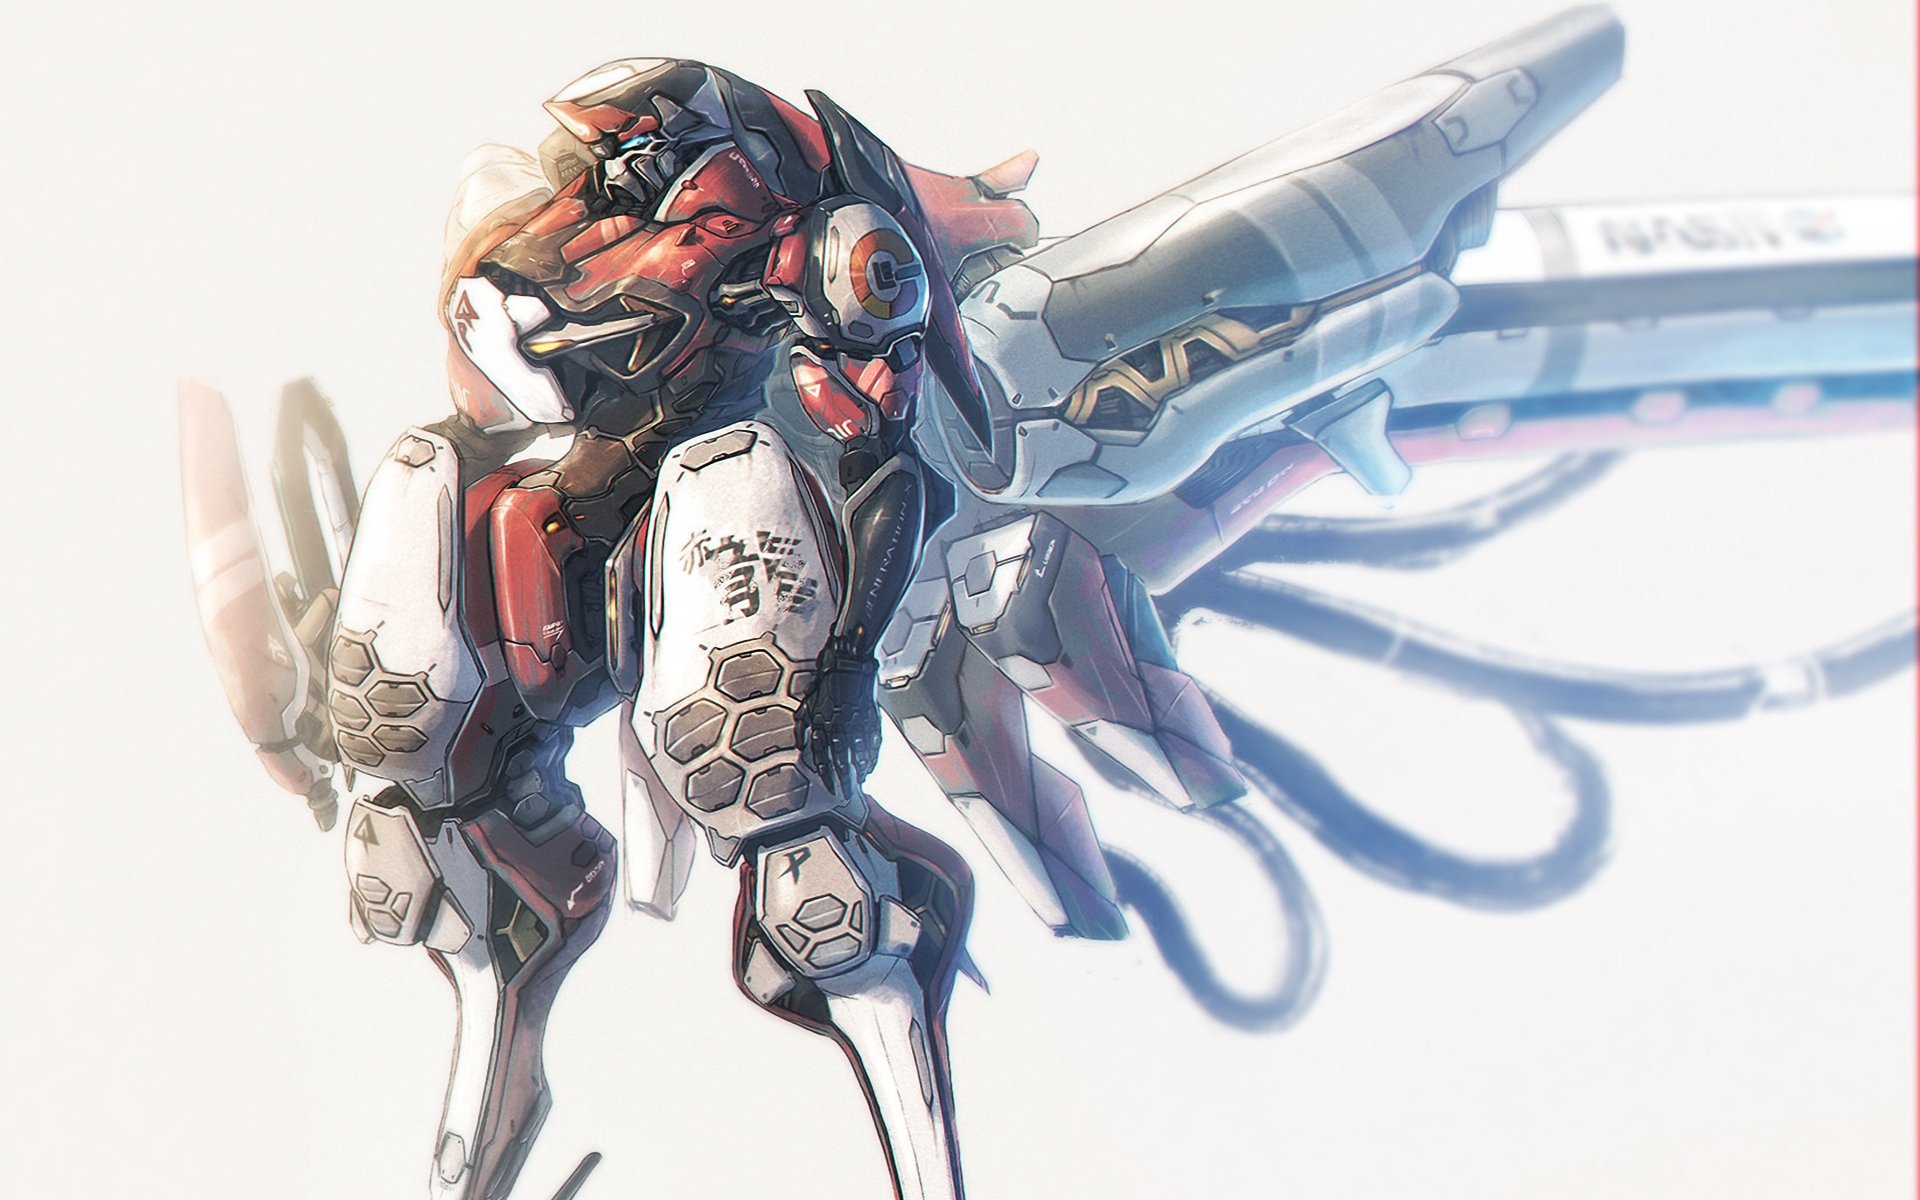 HD desktop wallpaper featuring a detailed anime-style mech in a dynamic pose with intricate armor design and sleek weaponry.